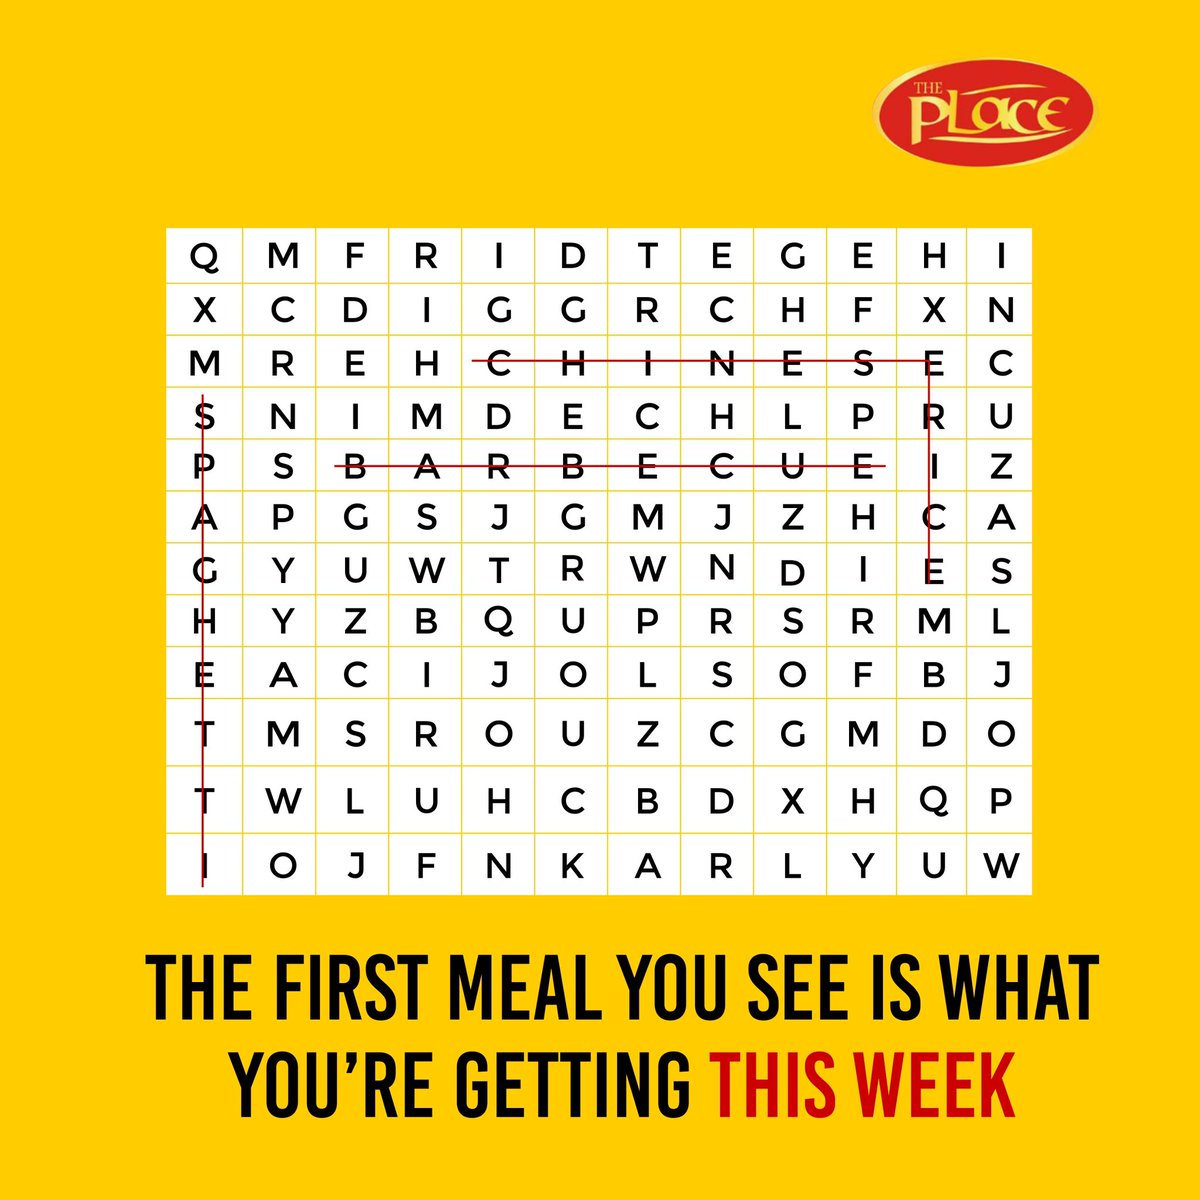 The First Meal You Spot Is What You’ll Be Savoring This Week. 

Which One Caught Your Eye first ?

Let’s go guys😎

#NigerianFood #AfricanCuisine #JollofRice #FriedPlantains #SpicyChicken #Suya #Foodie #Foodstagram #Delicious #theplacefoodng #lagosrestaurants #nigeriarestaurant